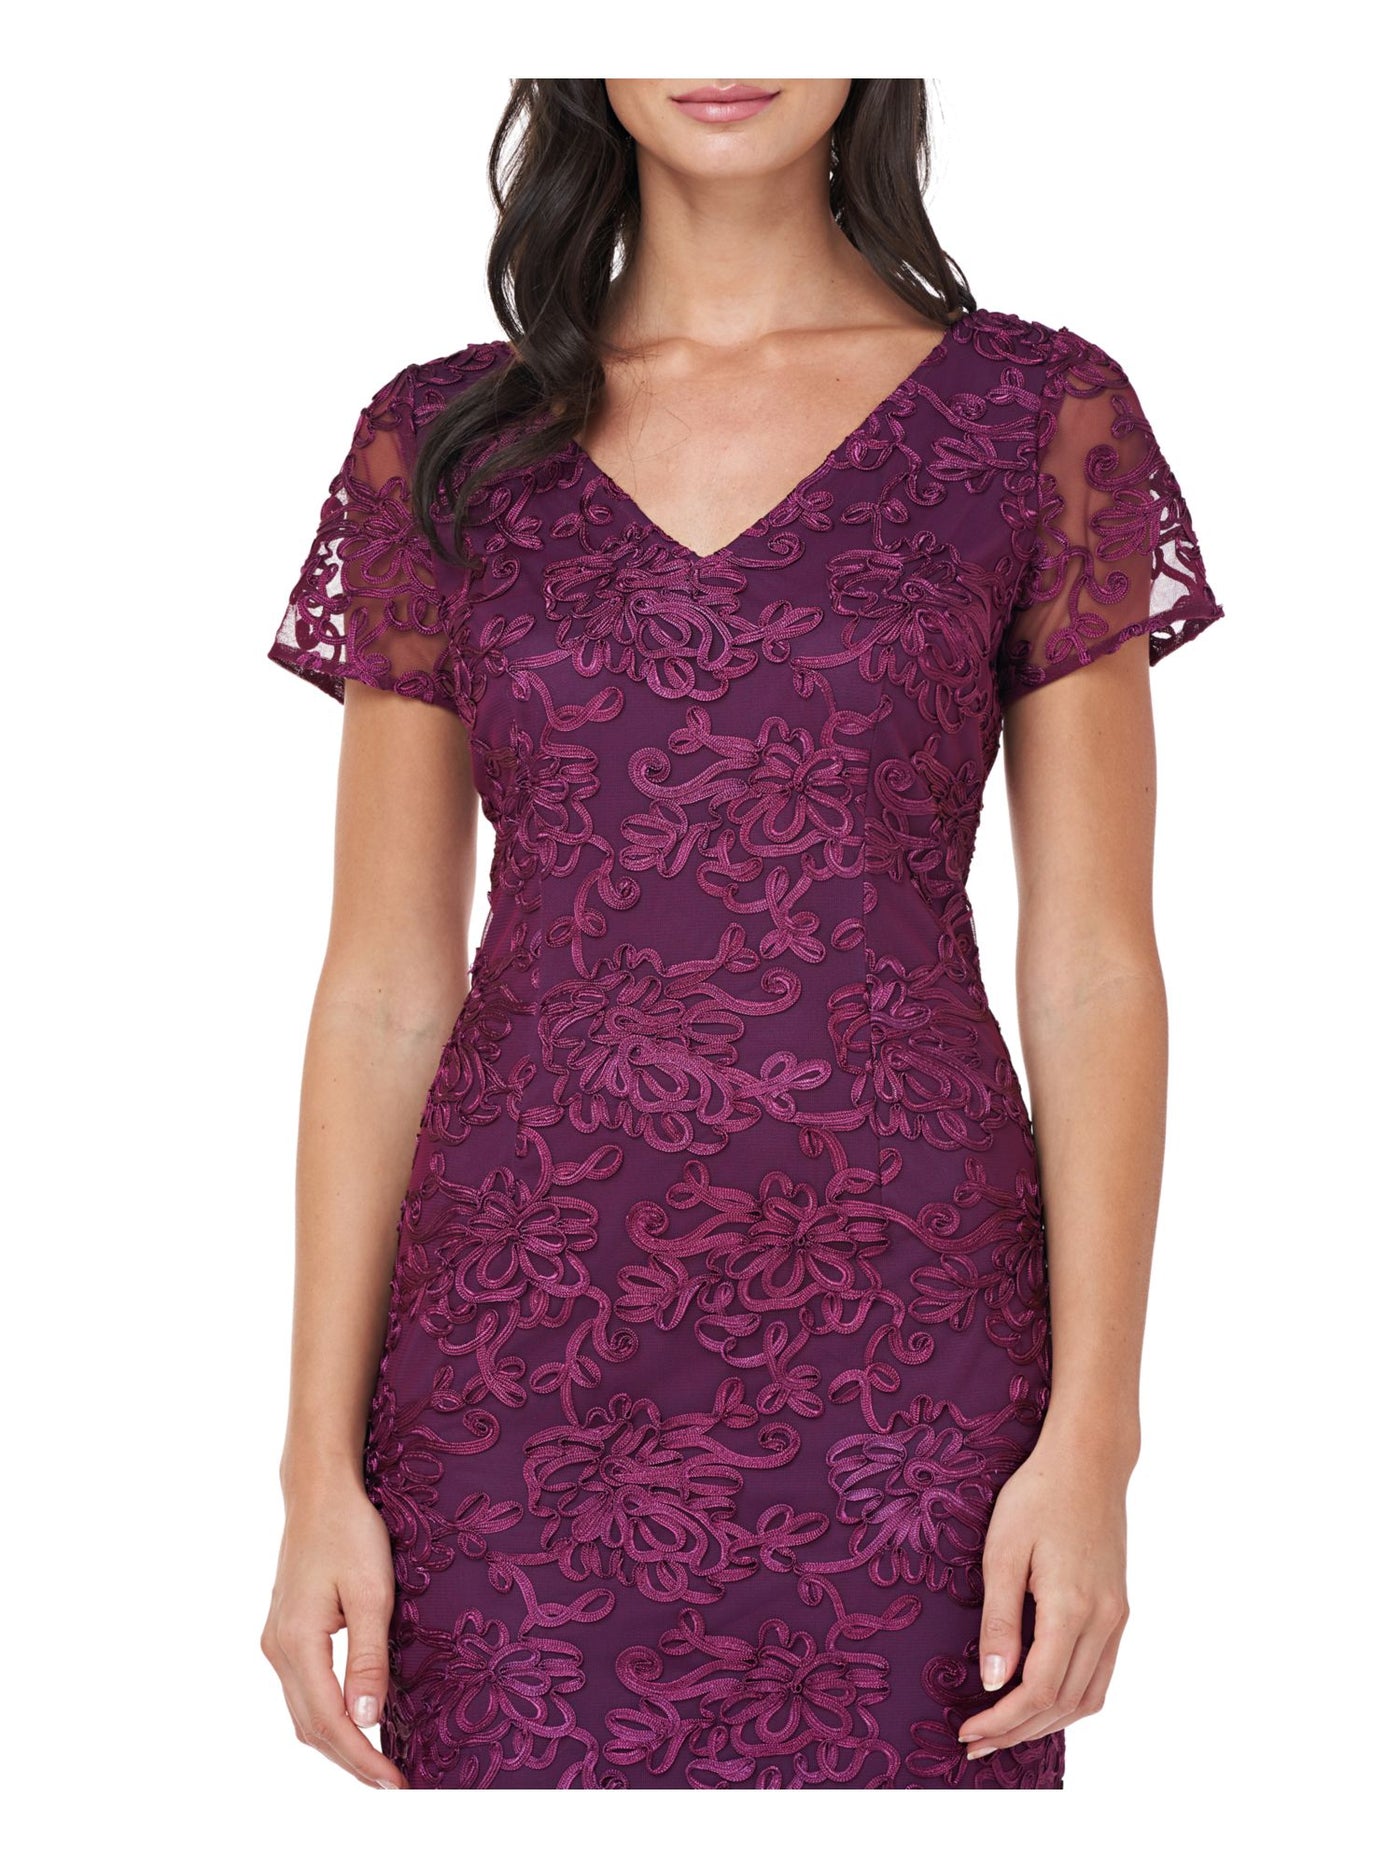 JS COLLECTION Womens Purple Embroidered Floral V Neck Midi Evening Sheath Dress 4